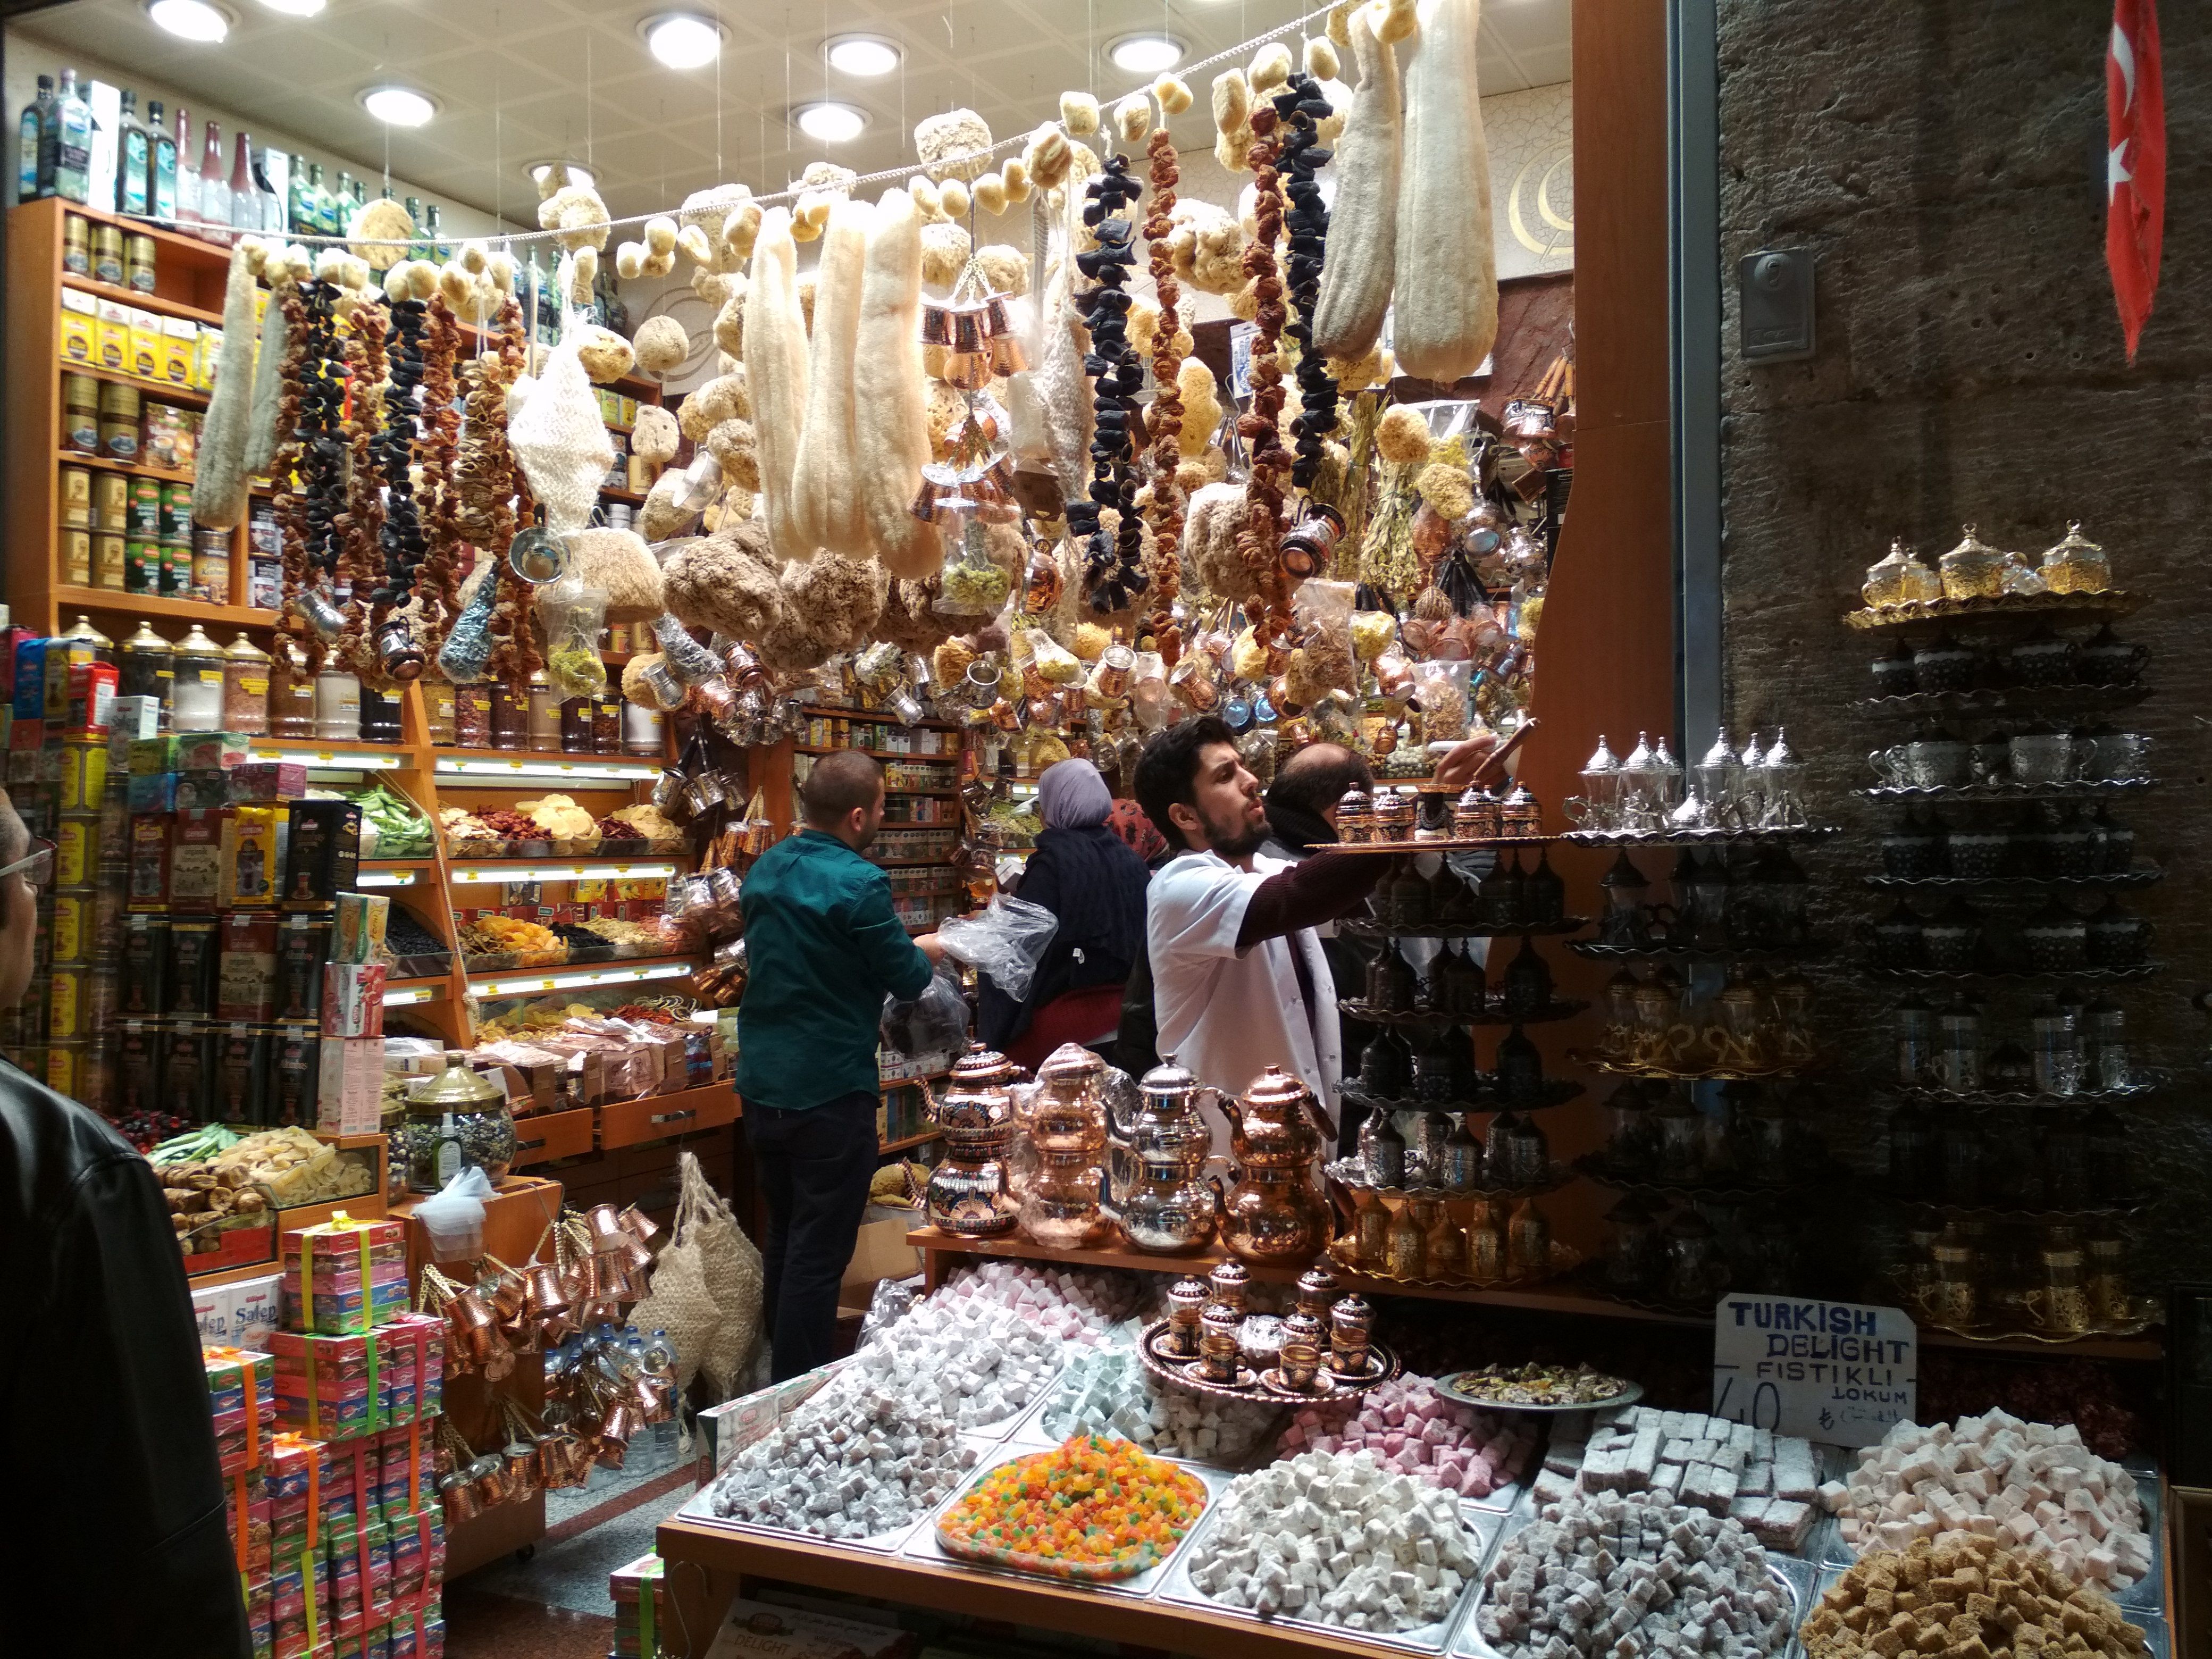 Caption: A photo of a shop inside the Egyptian bazaar in Istanbul, Turkey, selling spices, Turkish delight sweets, coffee pots, and various souvenirs. (Local Guide @DeniGu)